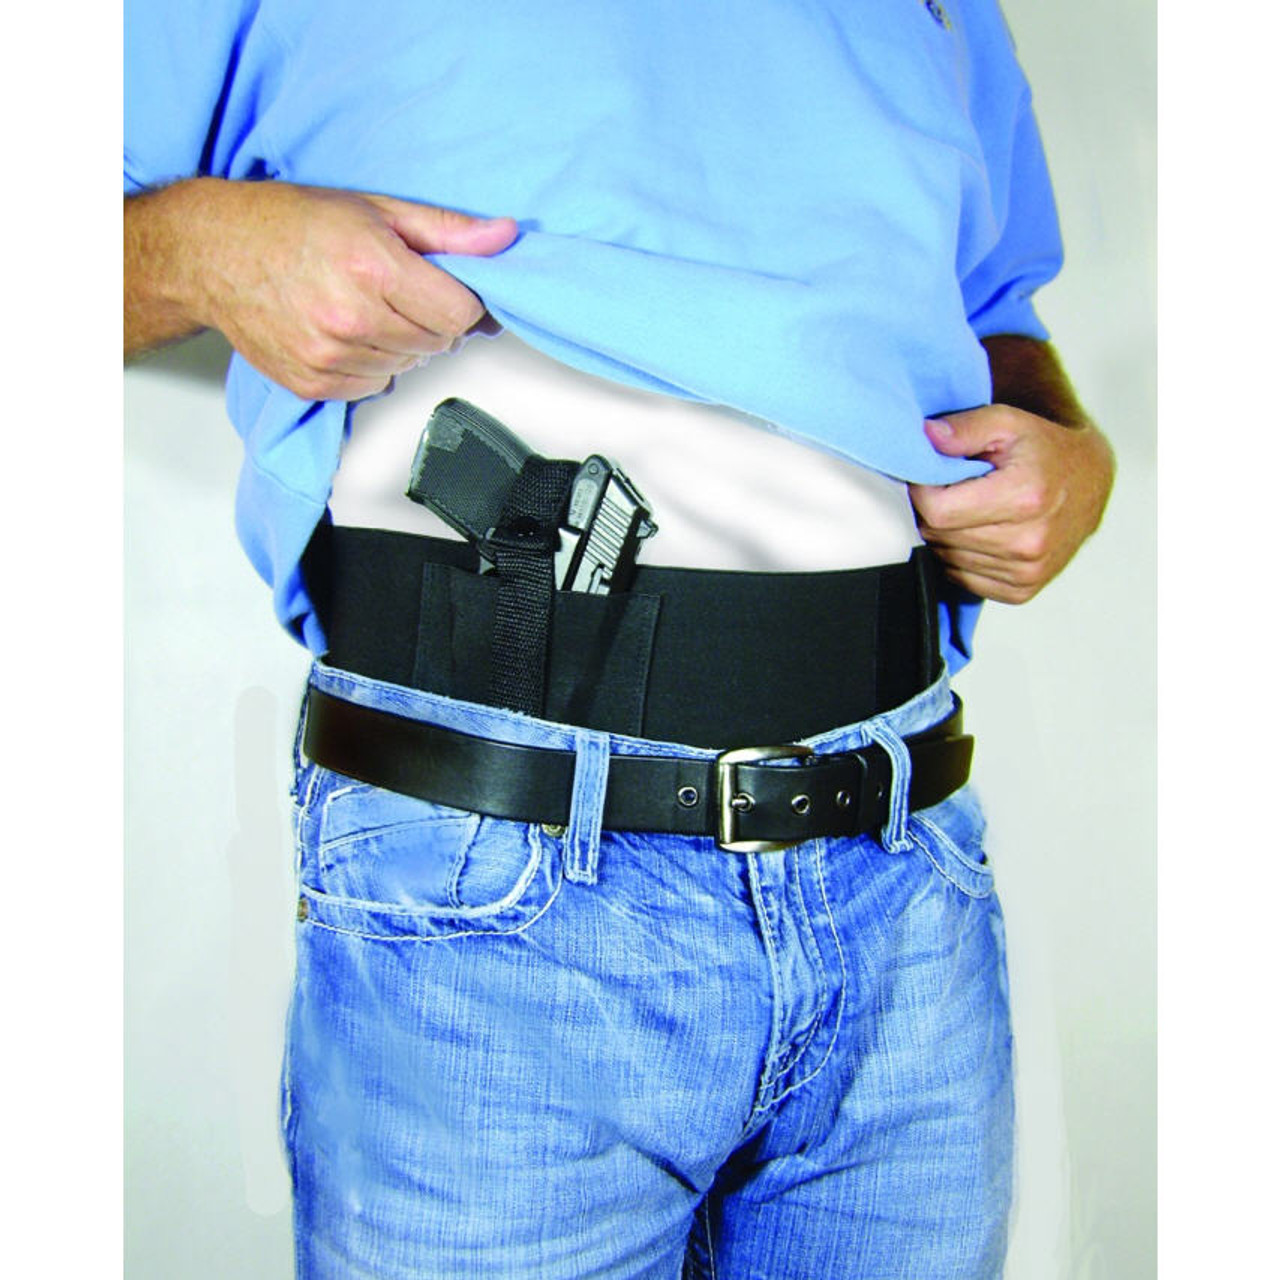  Acelane Belly Band Holster for Concealed Carry